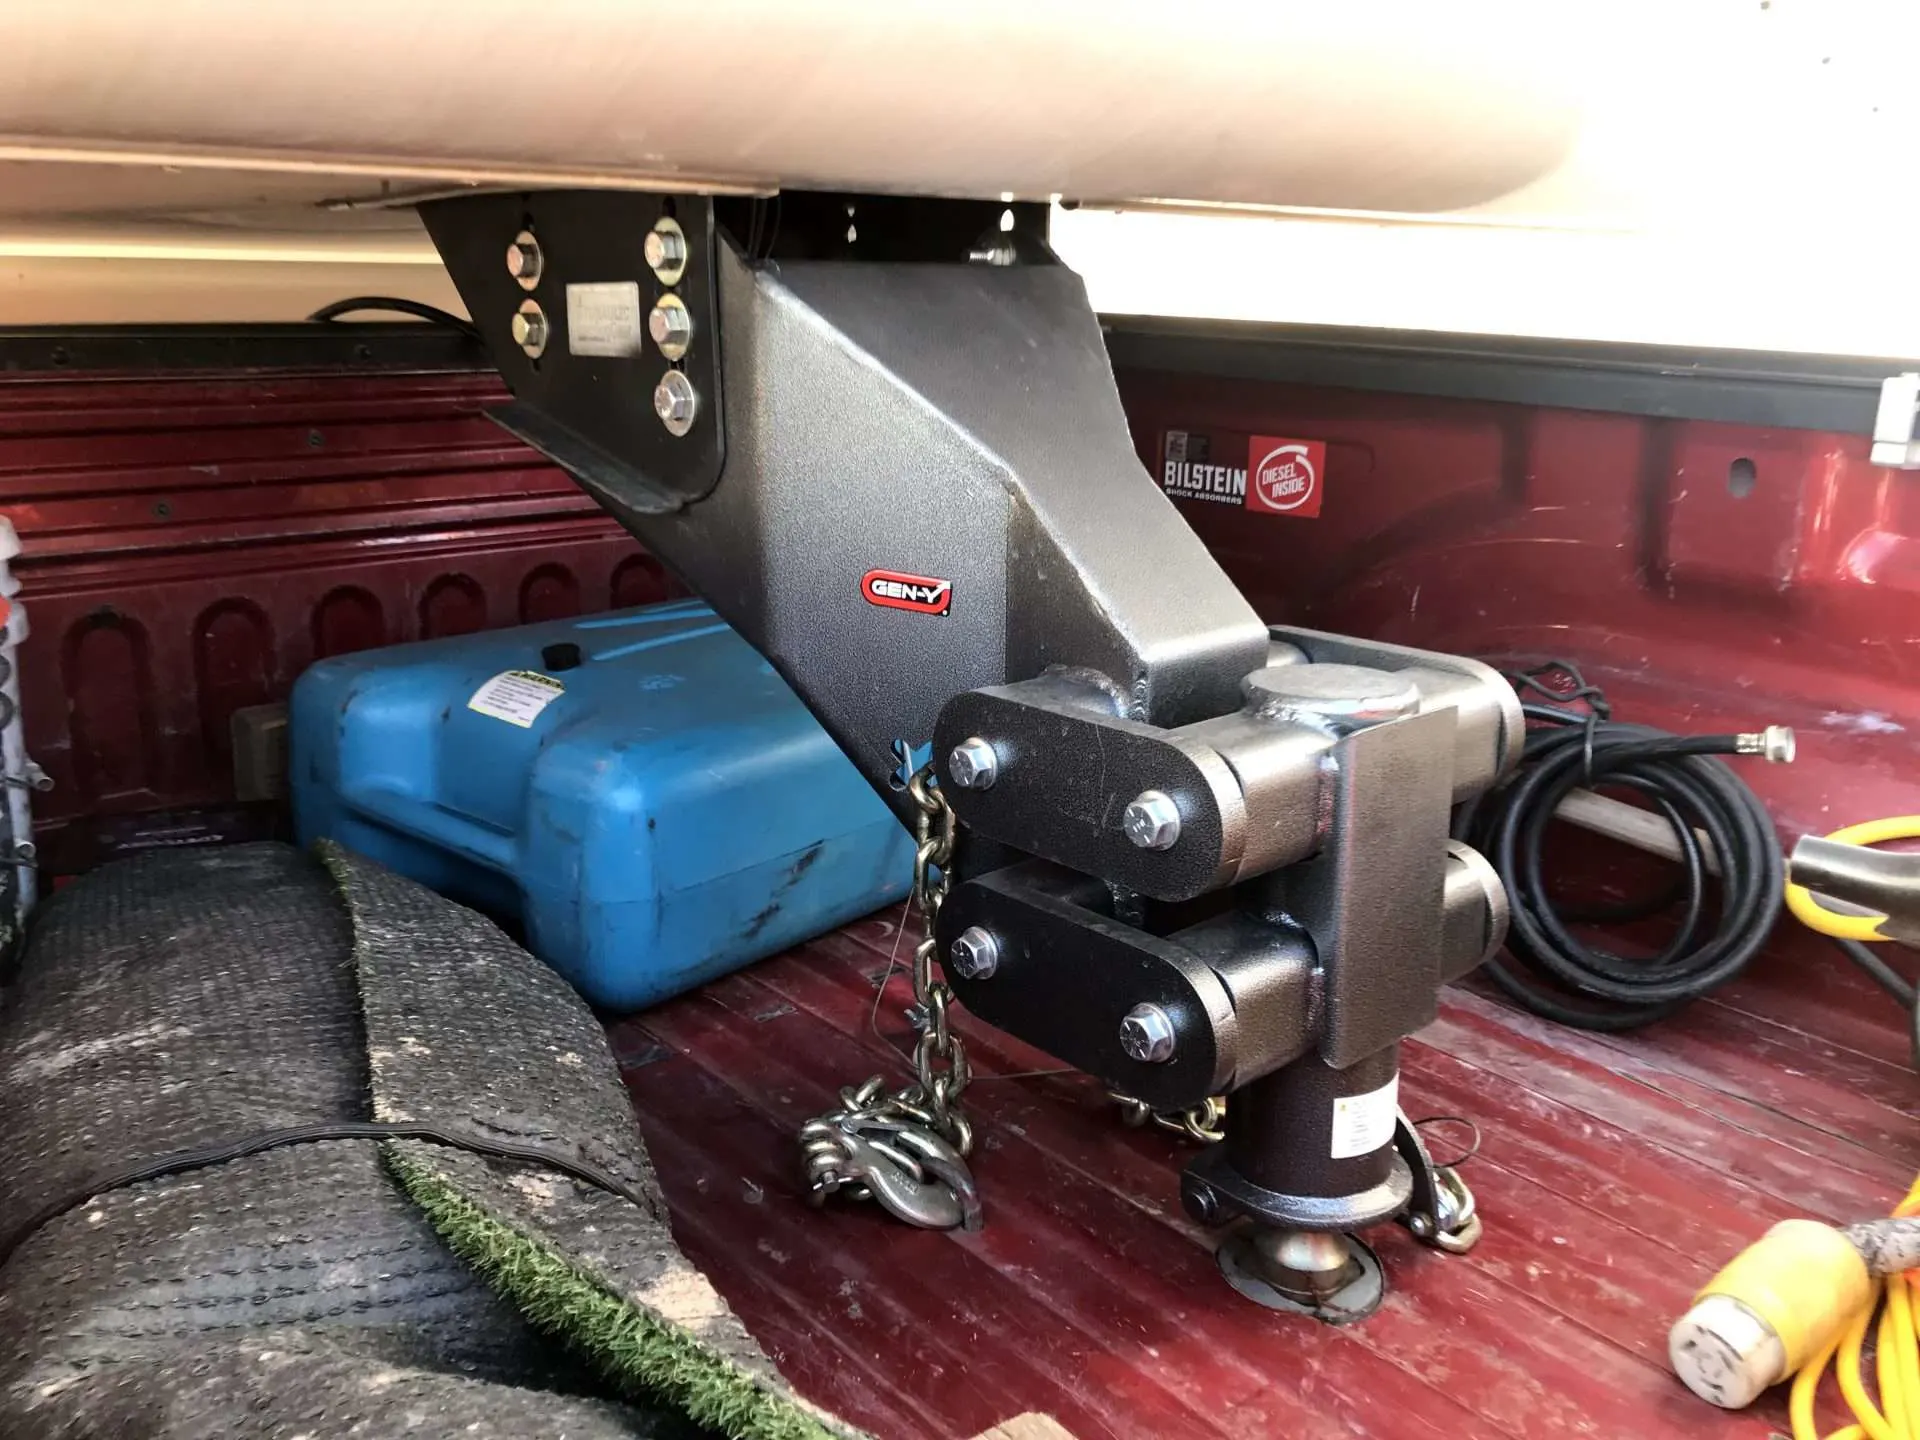 Gooseneck hitch installed in truck bed